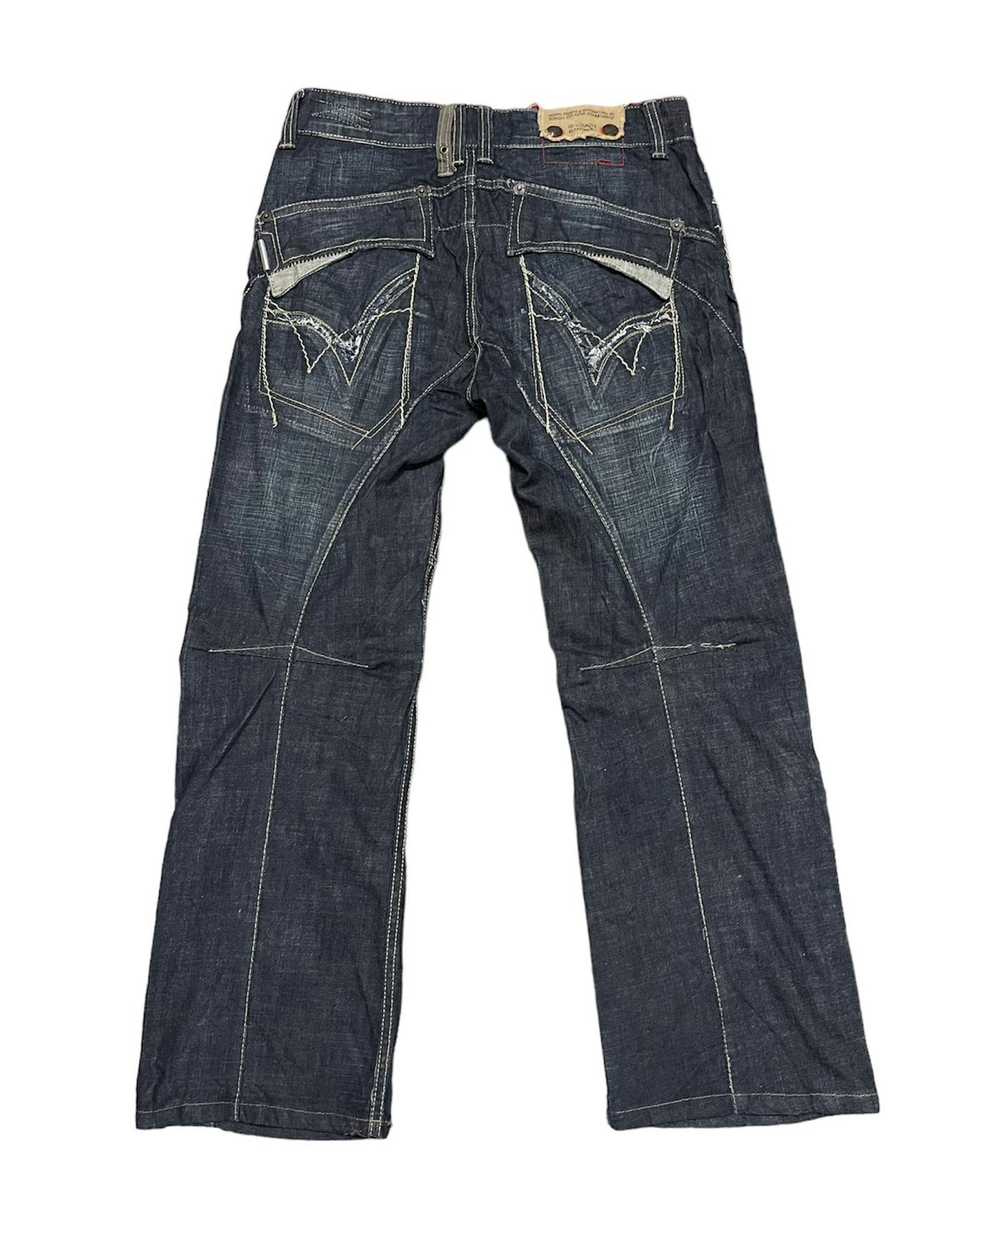 Japanese Brand Tough jeansmith jeans - image 2